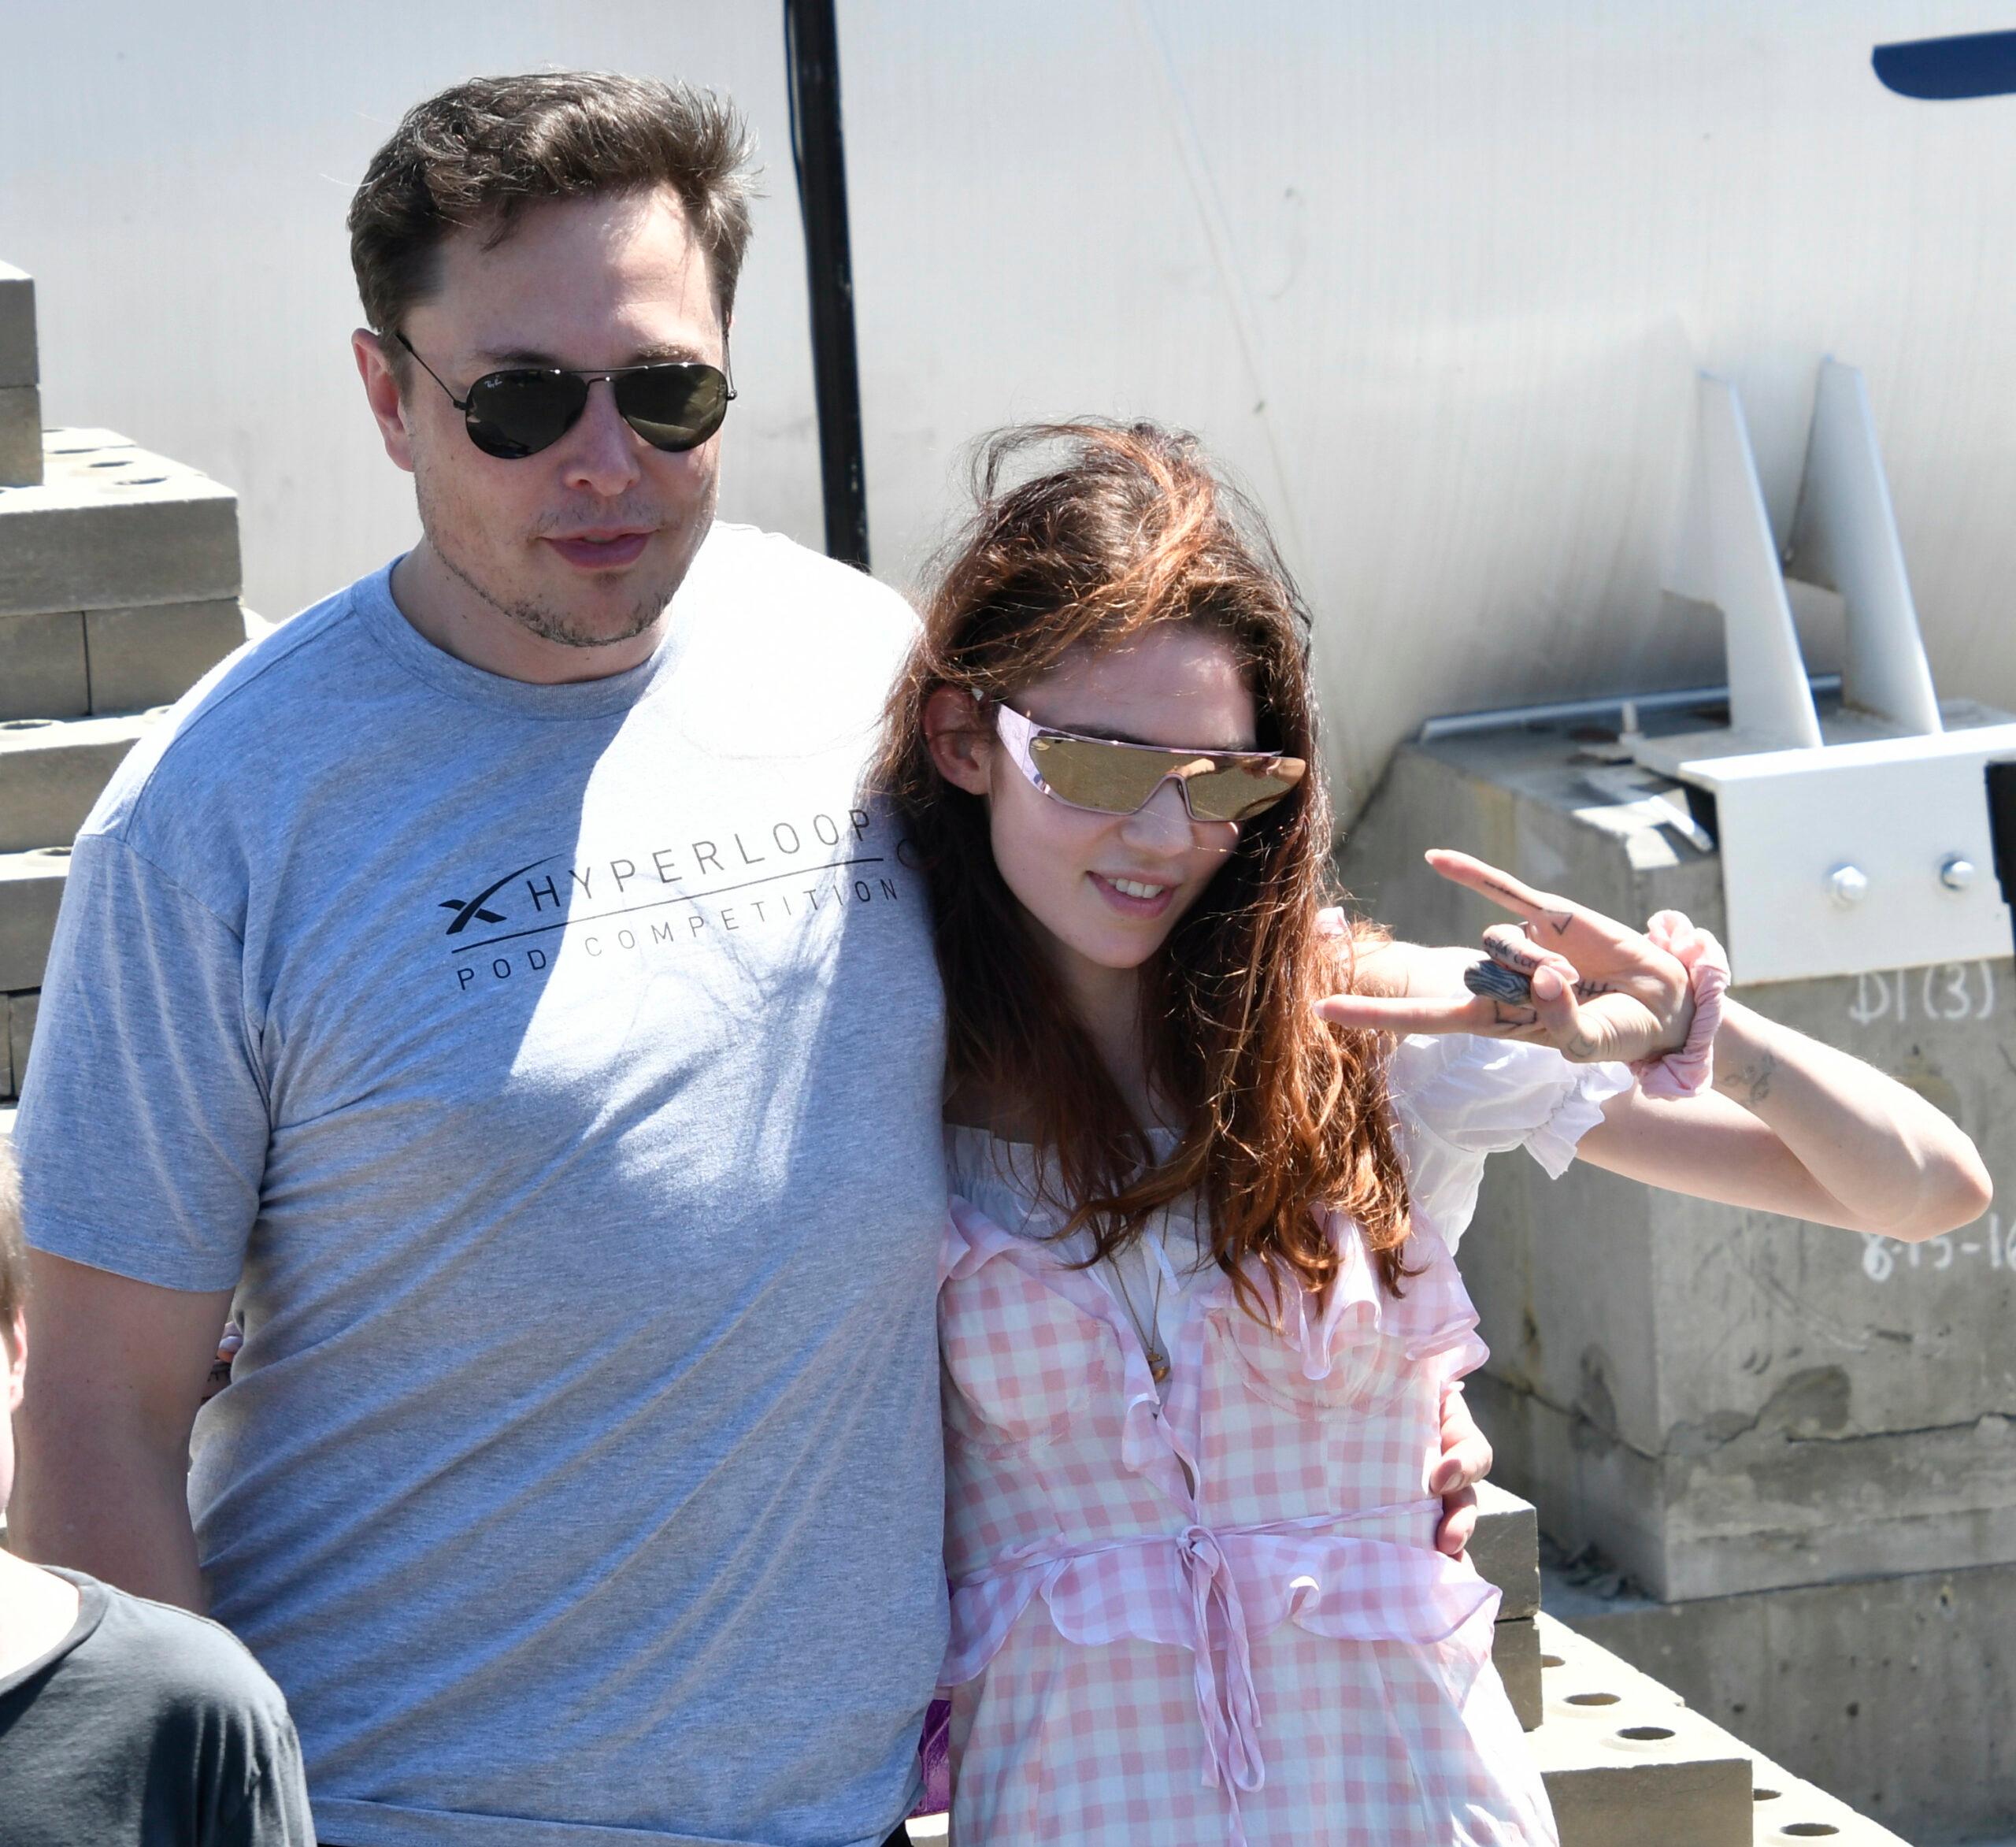 Elon Musk and Grimes at SpaceX apos s third Hyperloop Pod Competition 2018